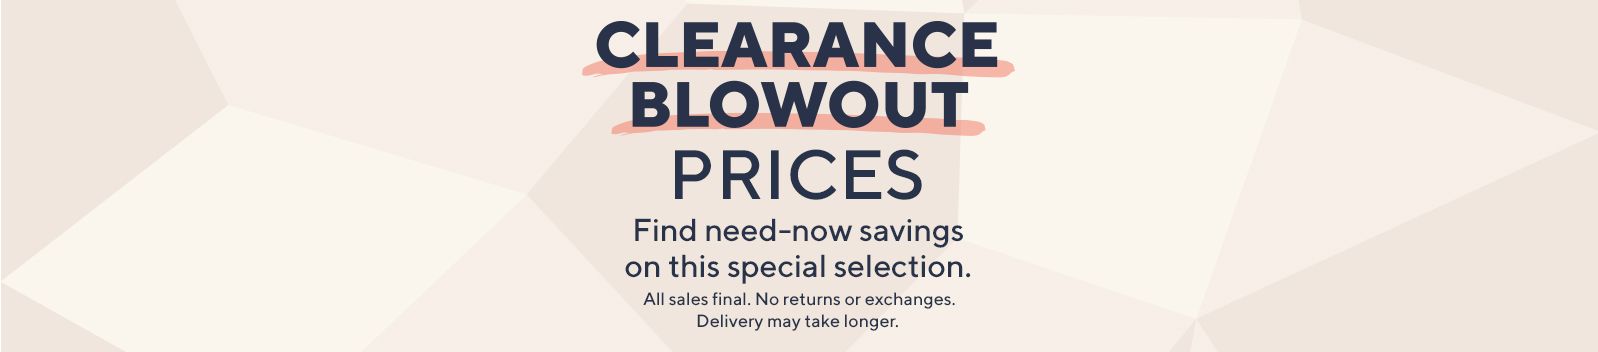 Clearance Blowout Prices: Find need-now savings on this special selection. All sales final. No returns or exchanges. Delivery may take longer. 